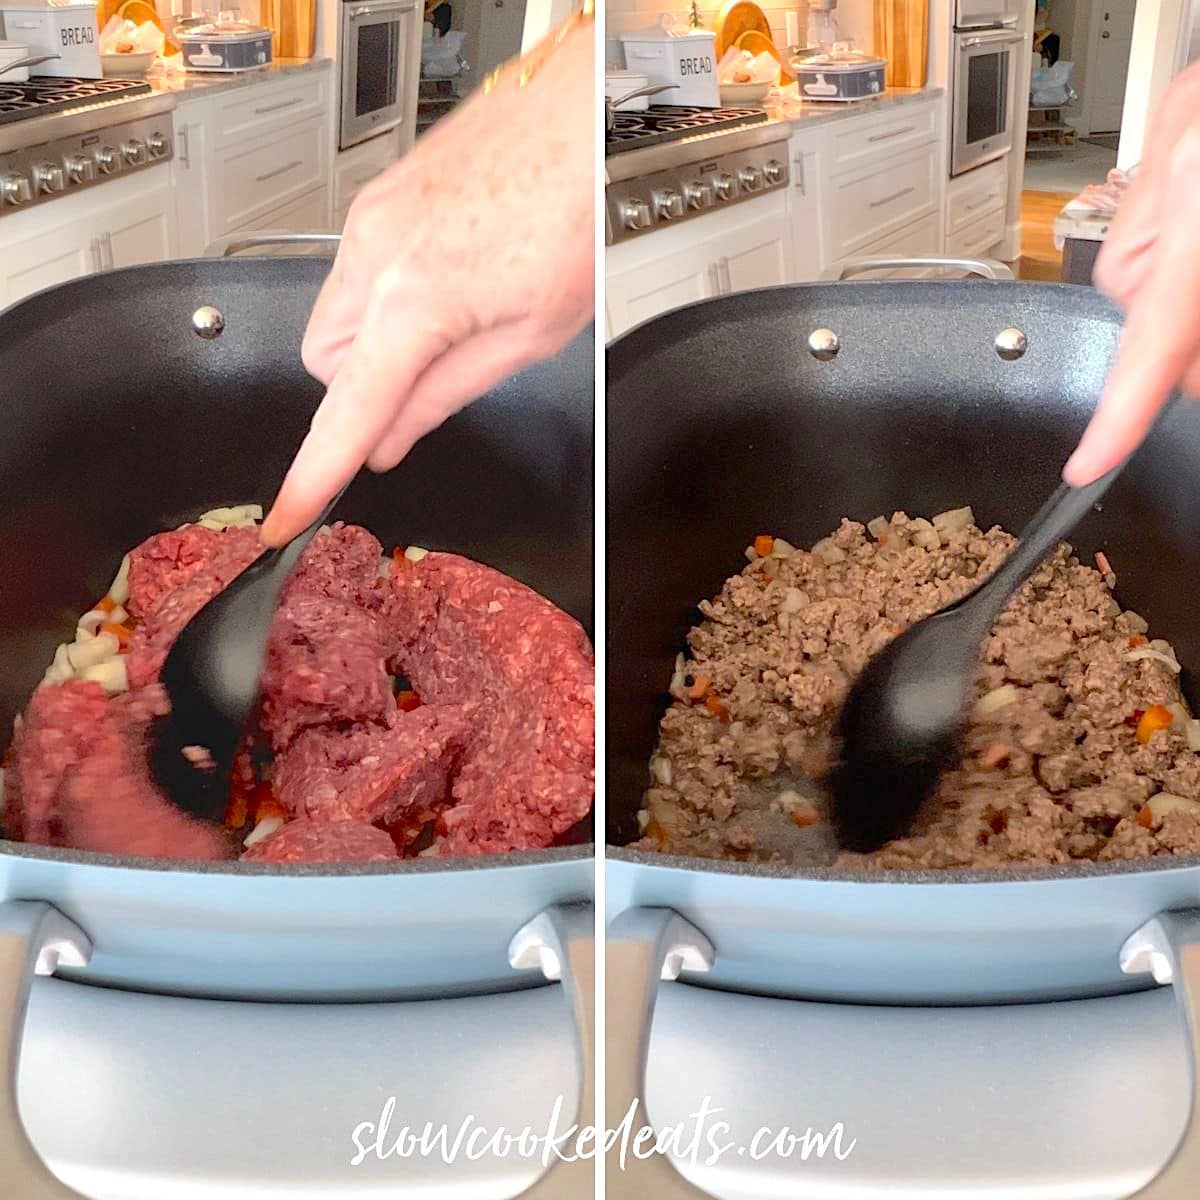 Cooking the ground beef and vegetables in a slow cooker.